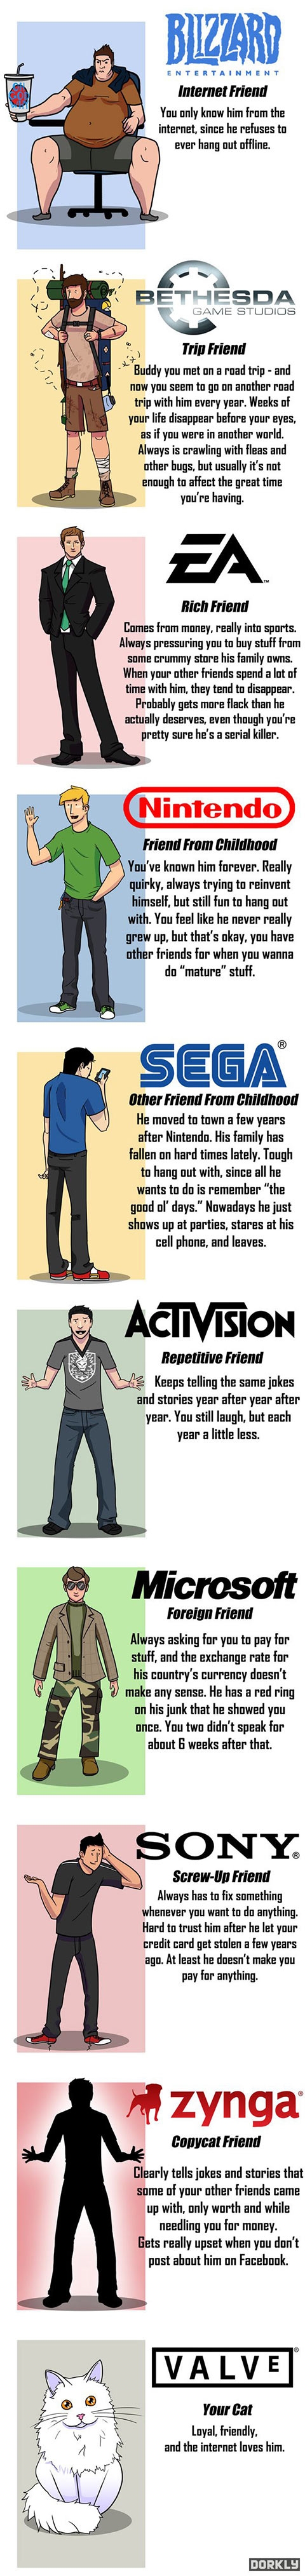 Your gamer friends.